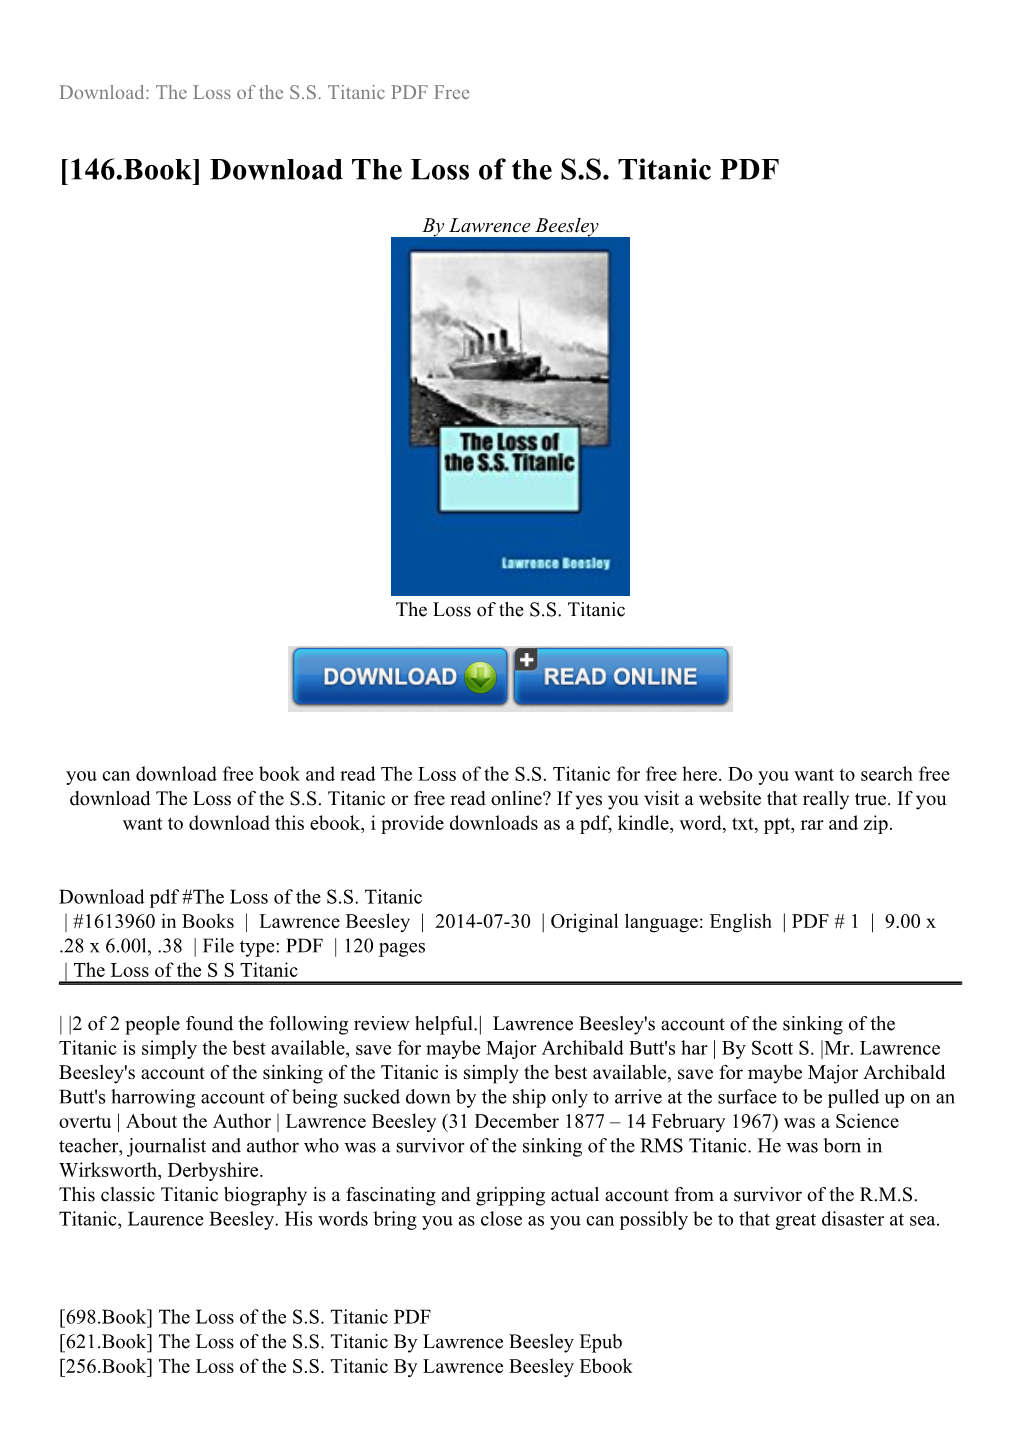 Download the Loss of the S.S. Titanic PDF